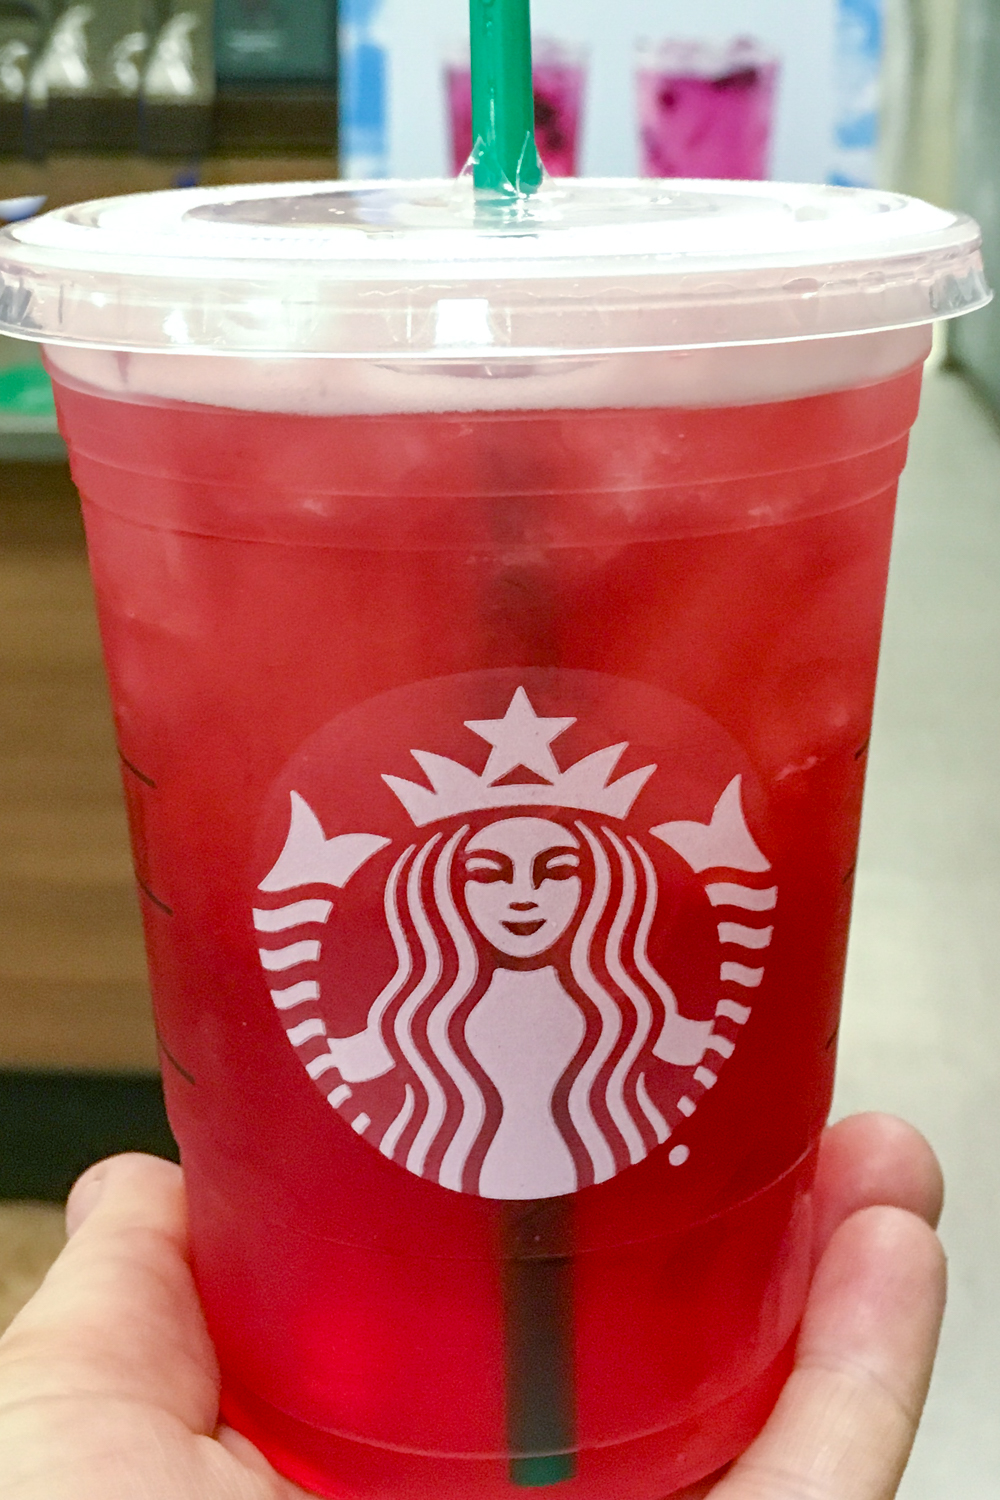 Every Starbucks Drink Without Caffeine - Sweet Steep